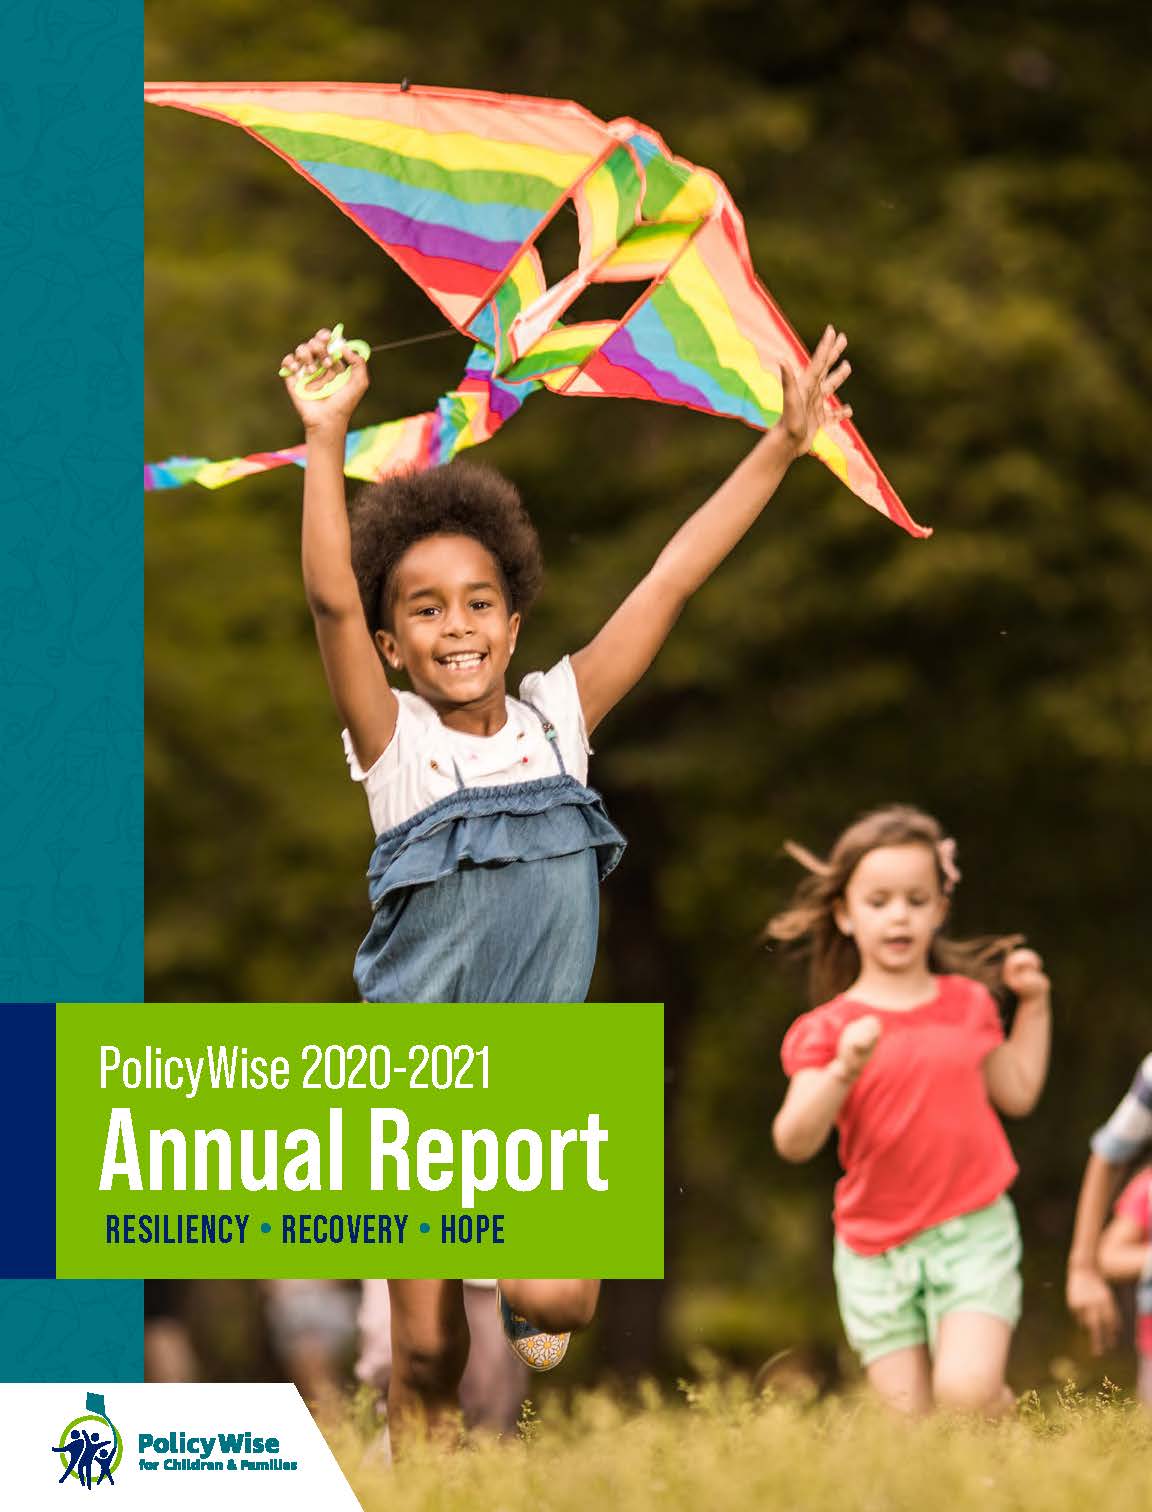 Cover to PolicyWise's 2020-2021 Annual Report